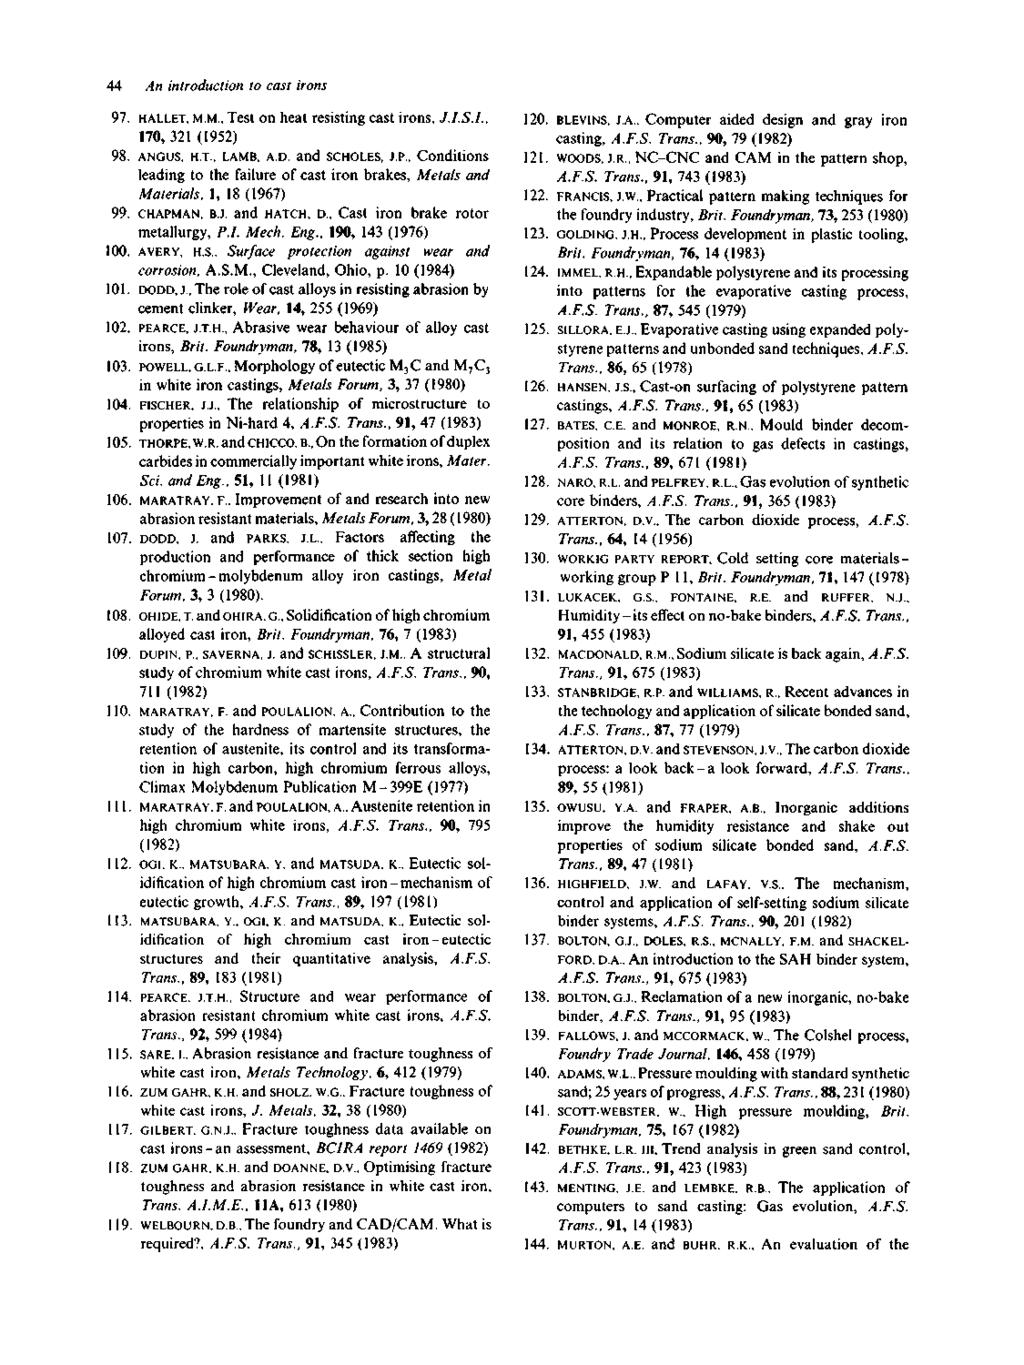 44 An introduction to cast irons 97. HALLET, M.M., Test on heat resisting cast irons, J.I.S.I., 170, 321 (1952) 98. ANGUS, HT., LAMB, AD. and SCHOLES, J.P.